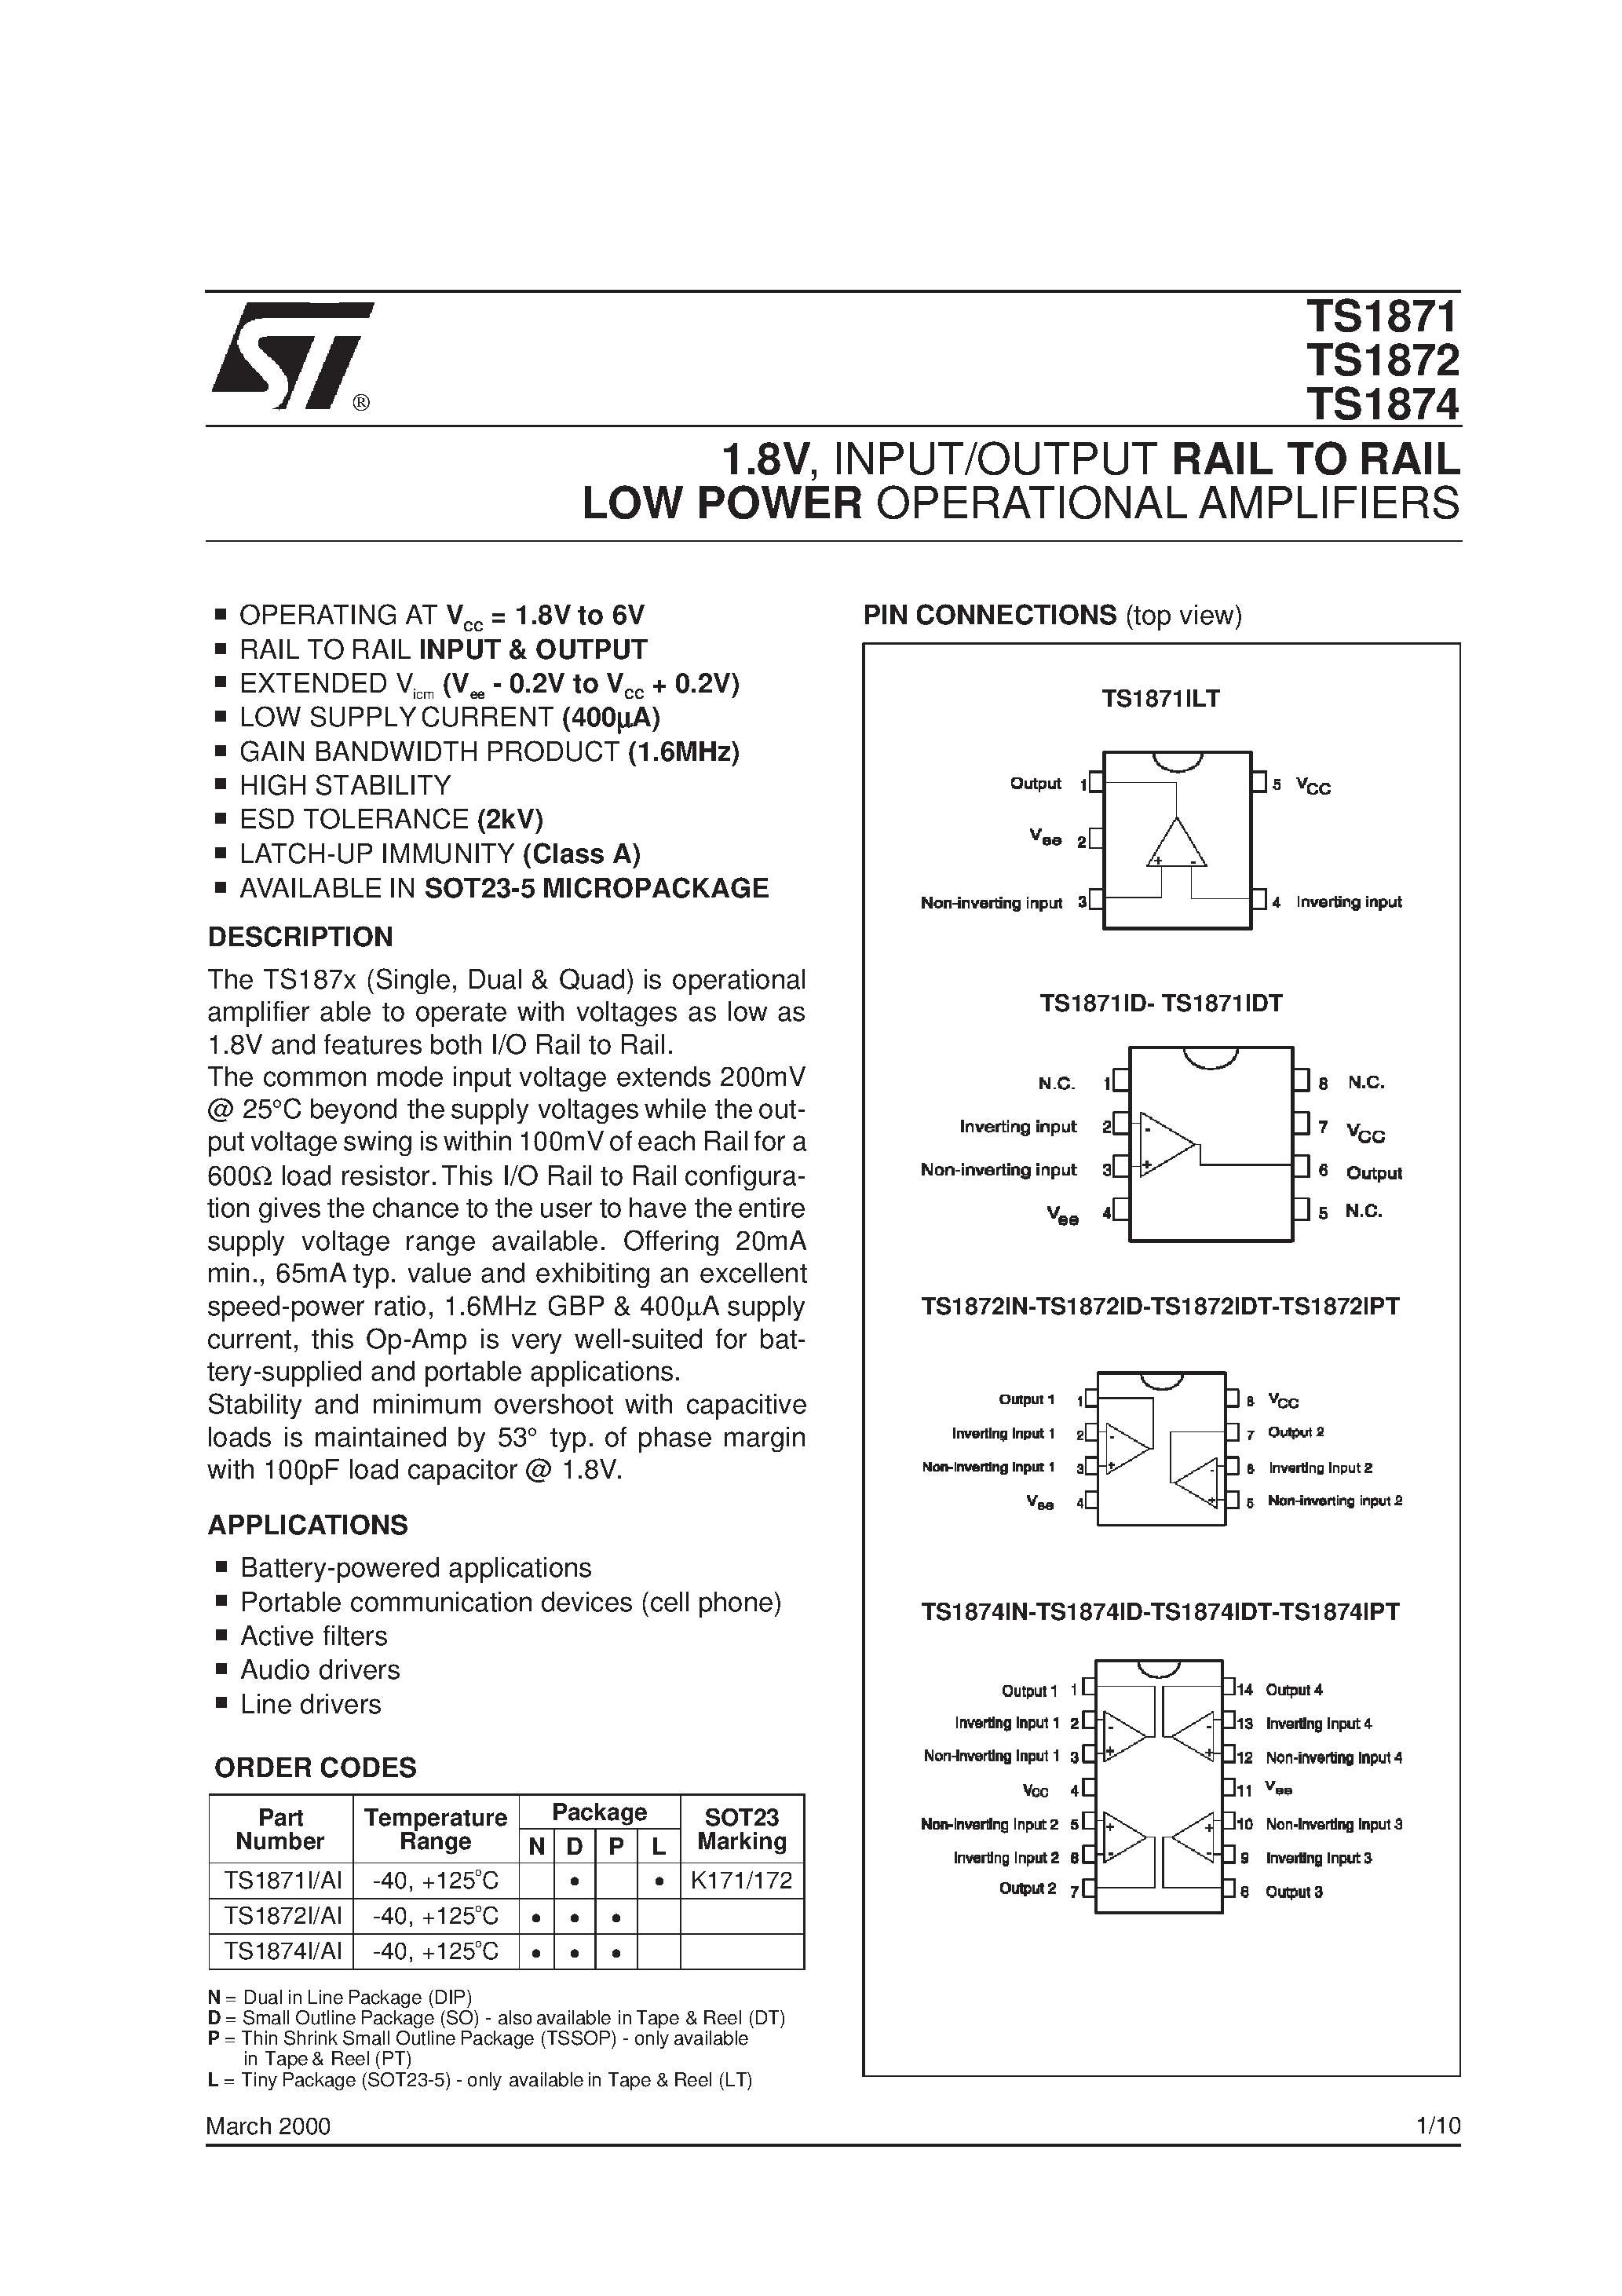 Datasheet TS1871I - 1.8V/ INPUT/OUTPUT RAIL TO RAIL LOW POWER OPERATIONAL AMPLIFIERS page 1